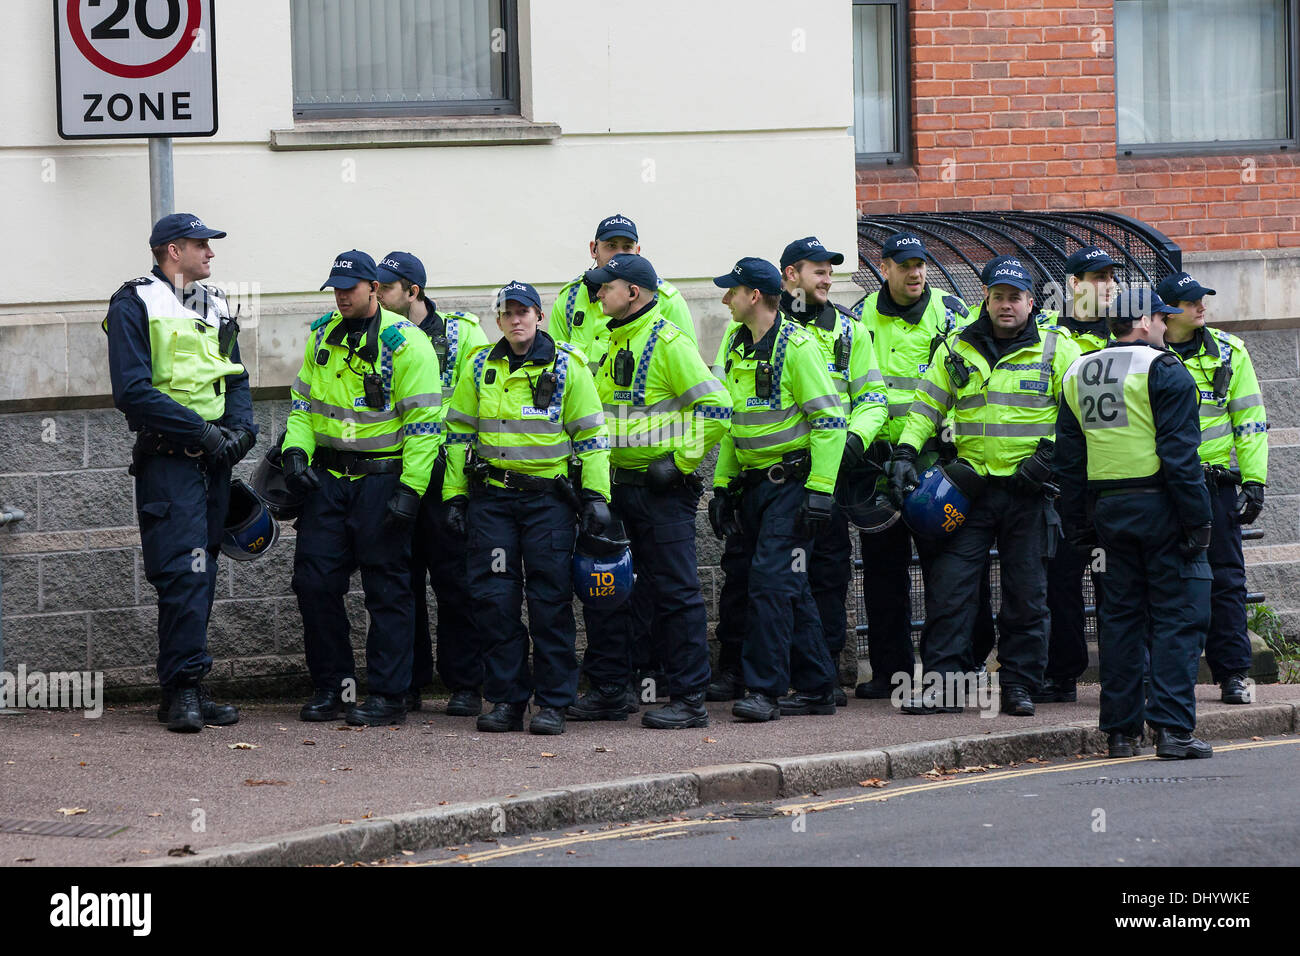 A group of British police with riot helmets ready. Stock Photo